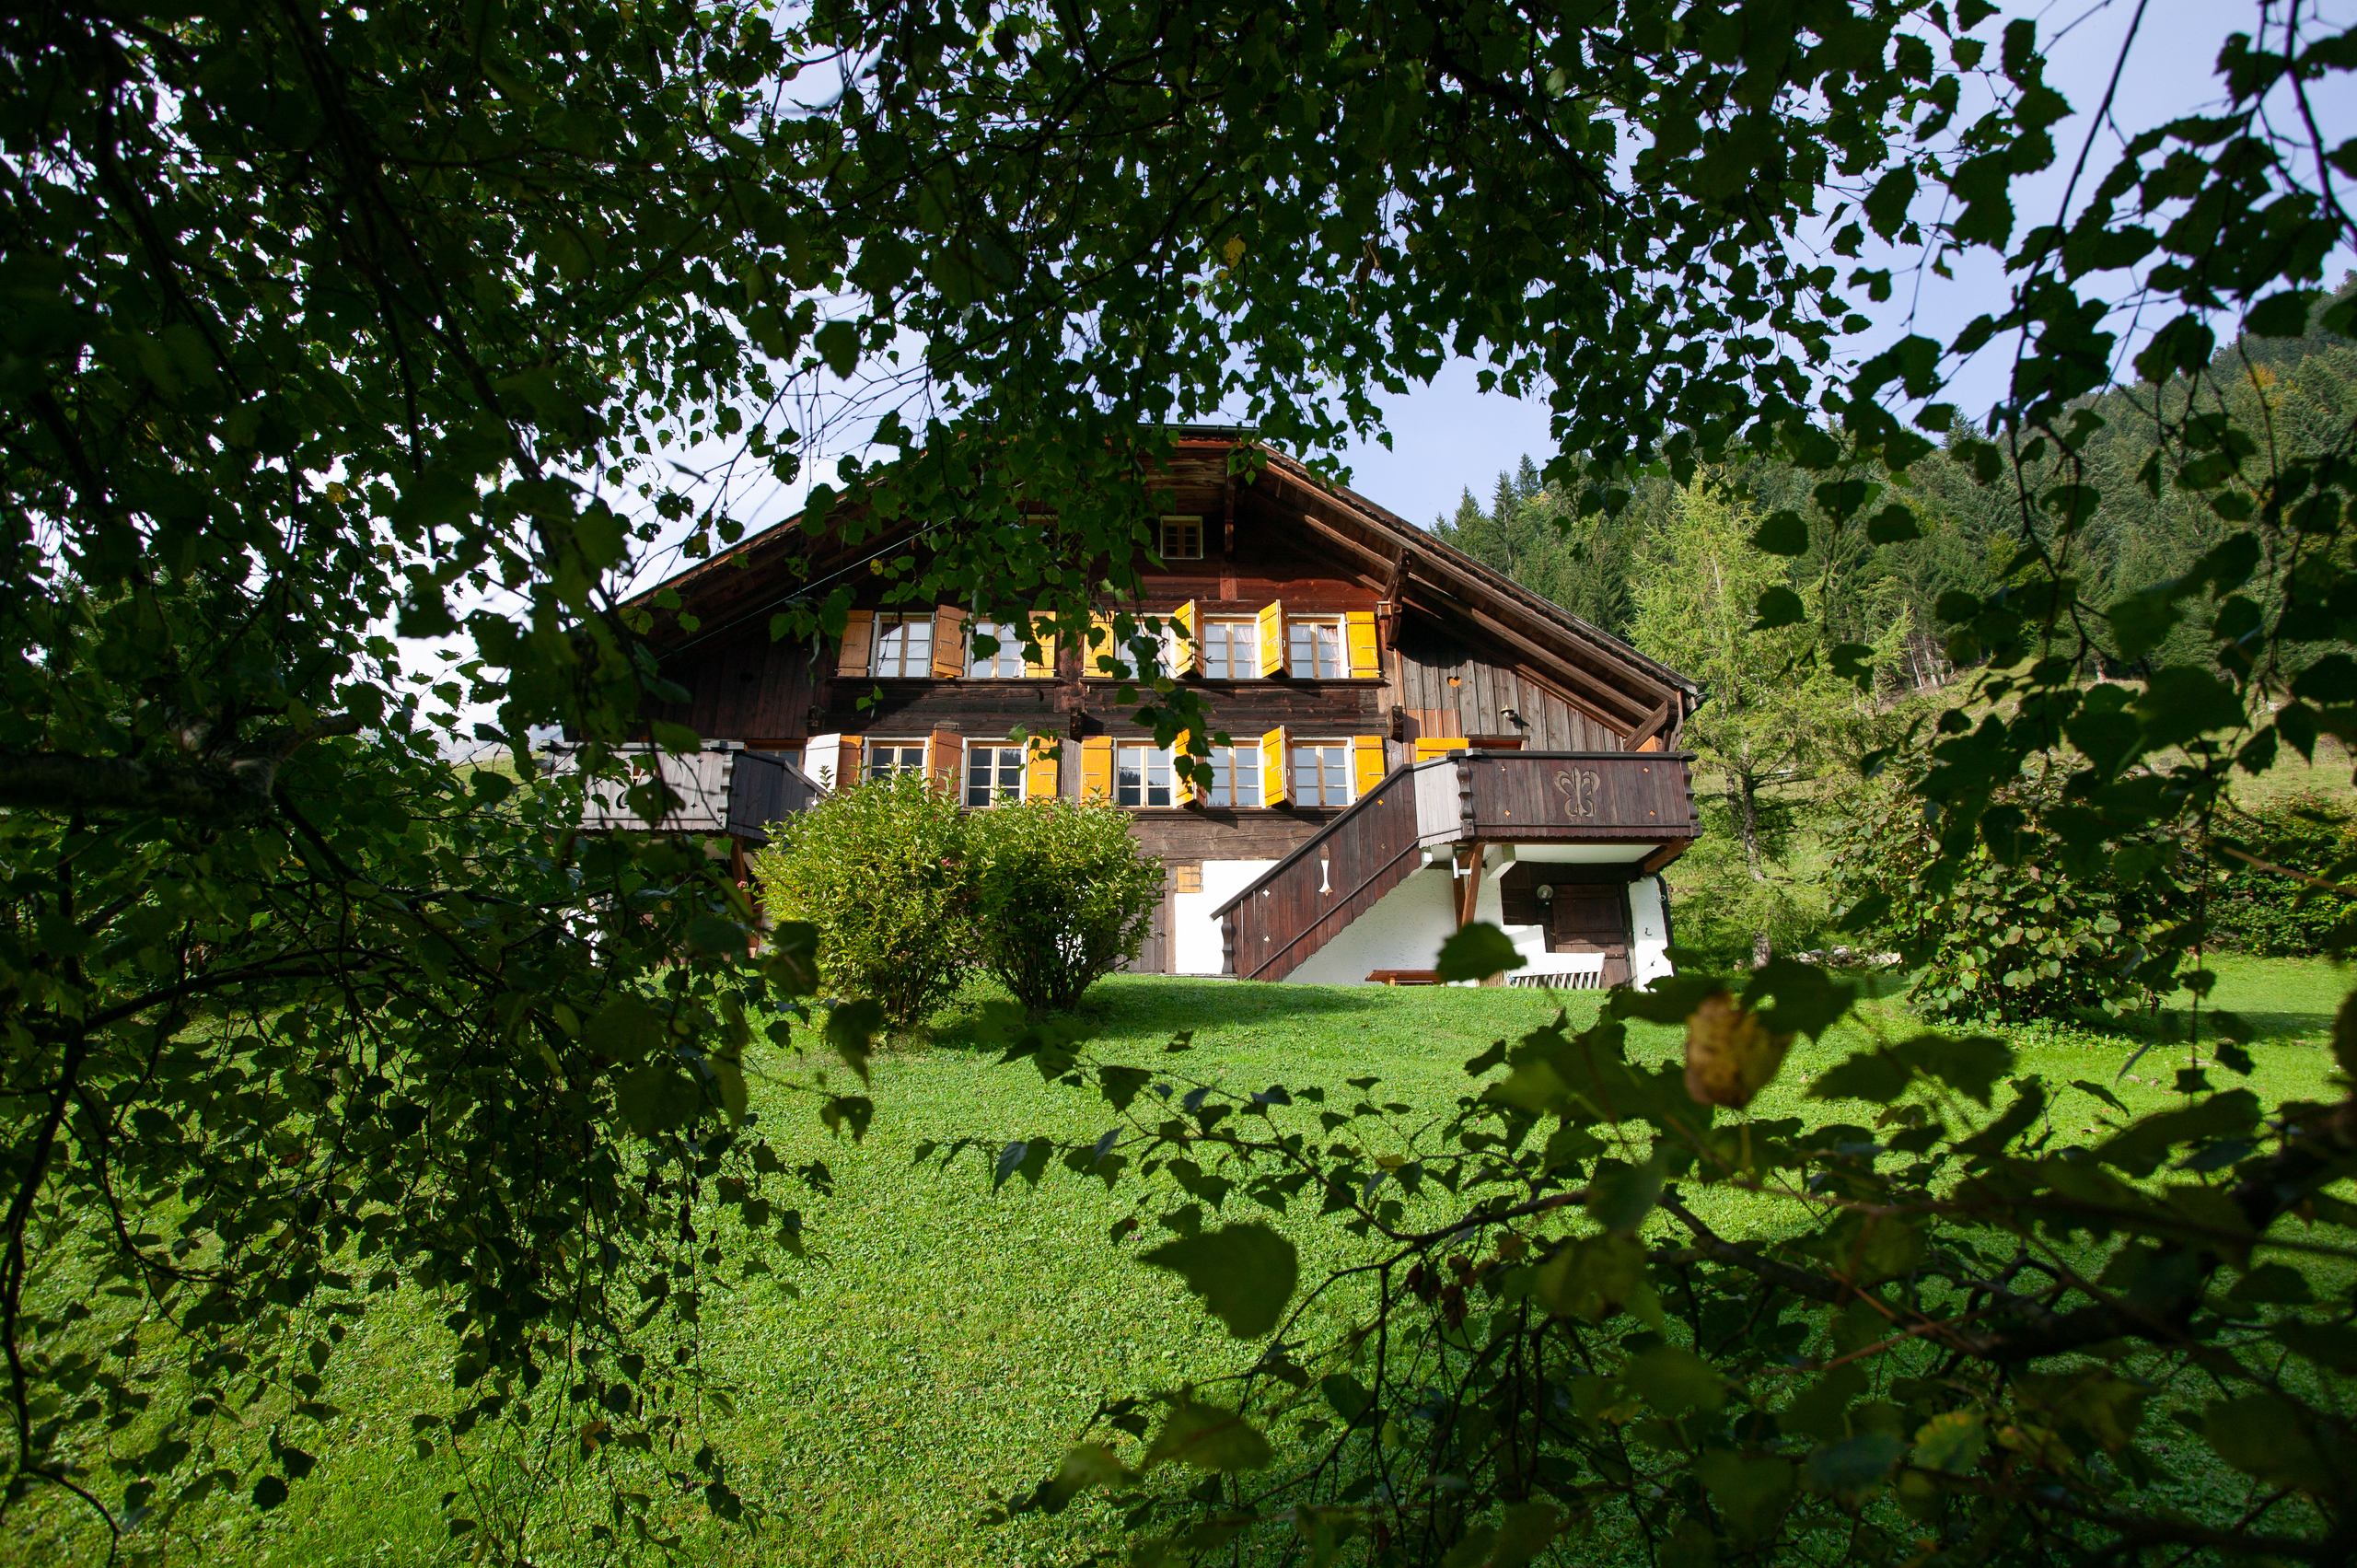 Gstaad Real State Opportunities. @louisvuitton…